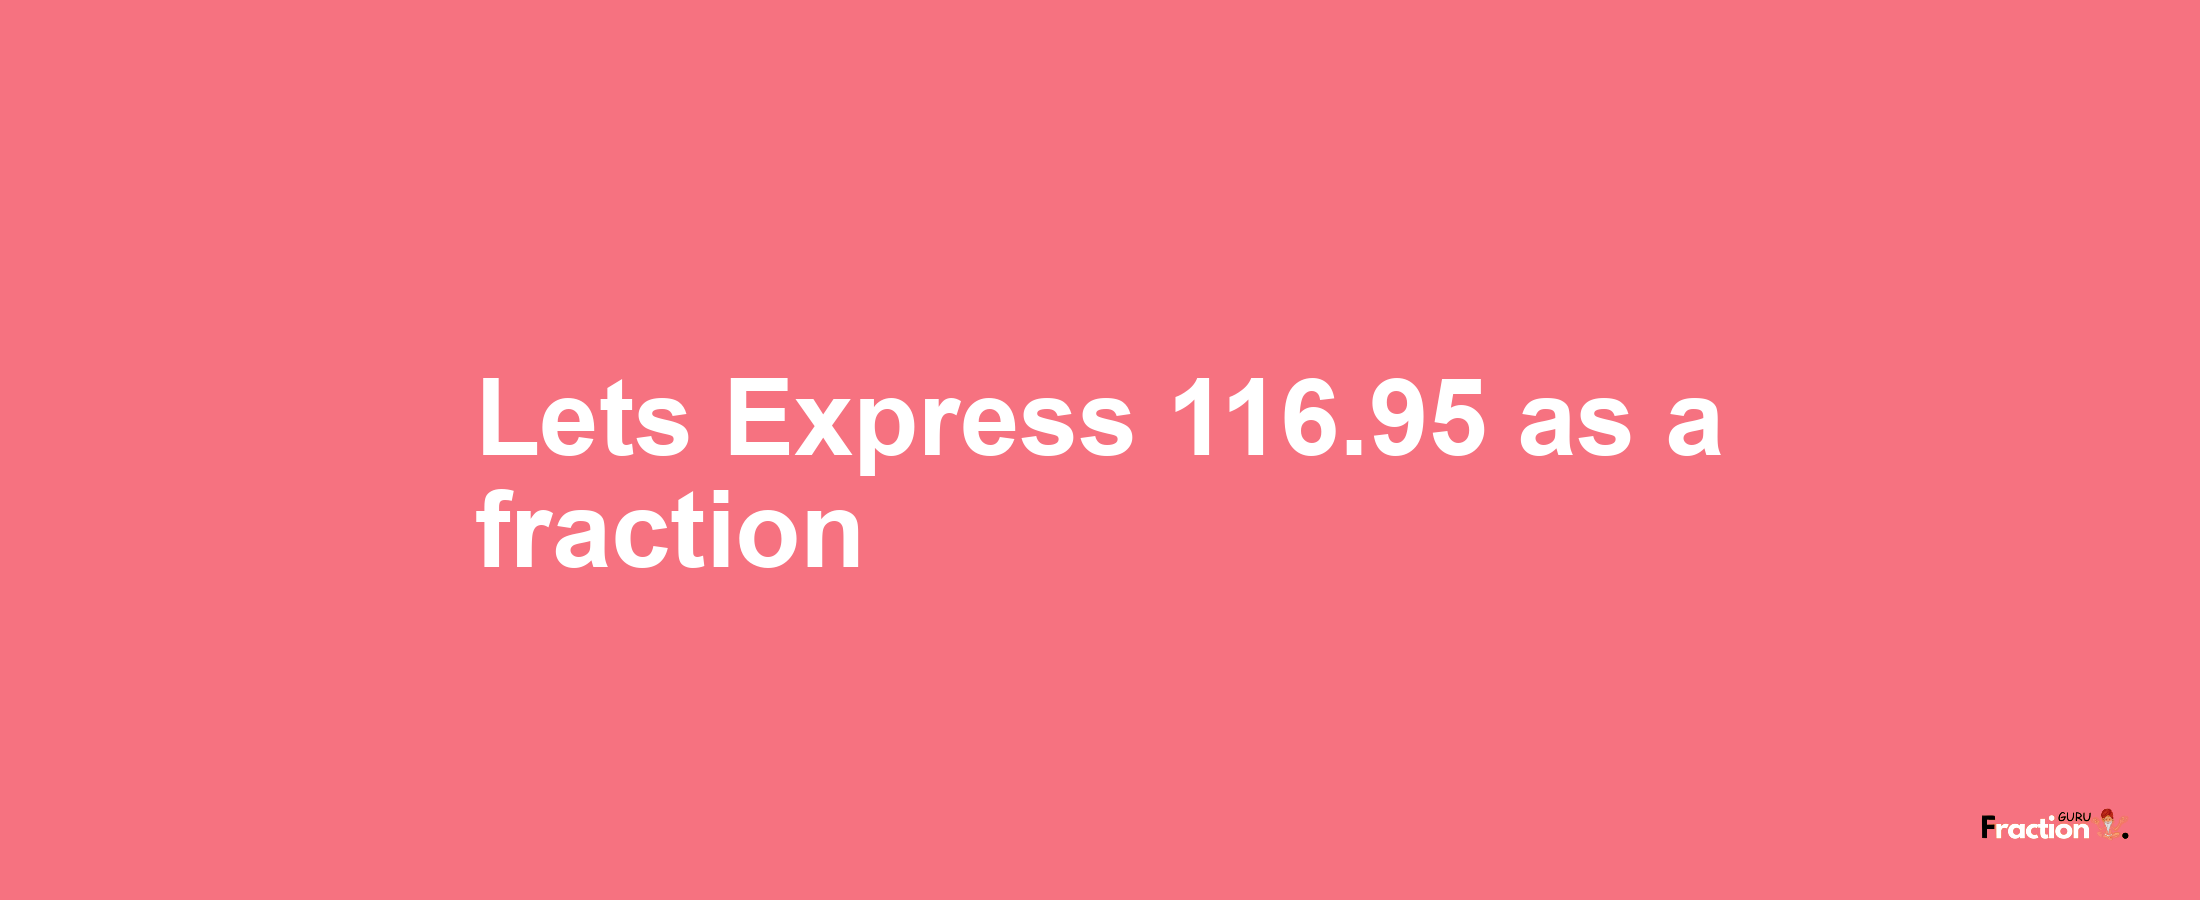 Lets Express 116.95 as afraction